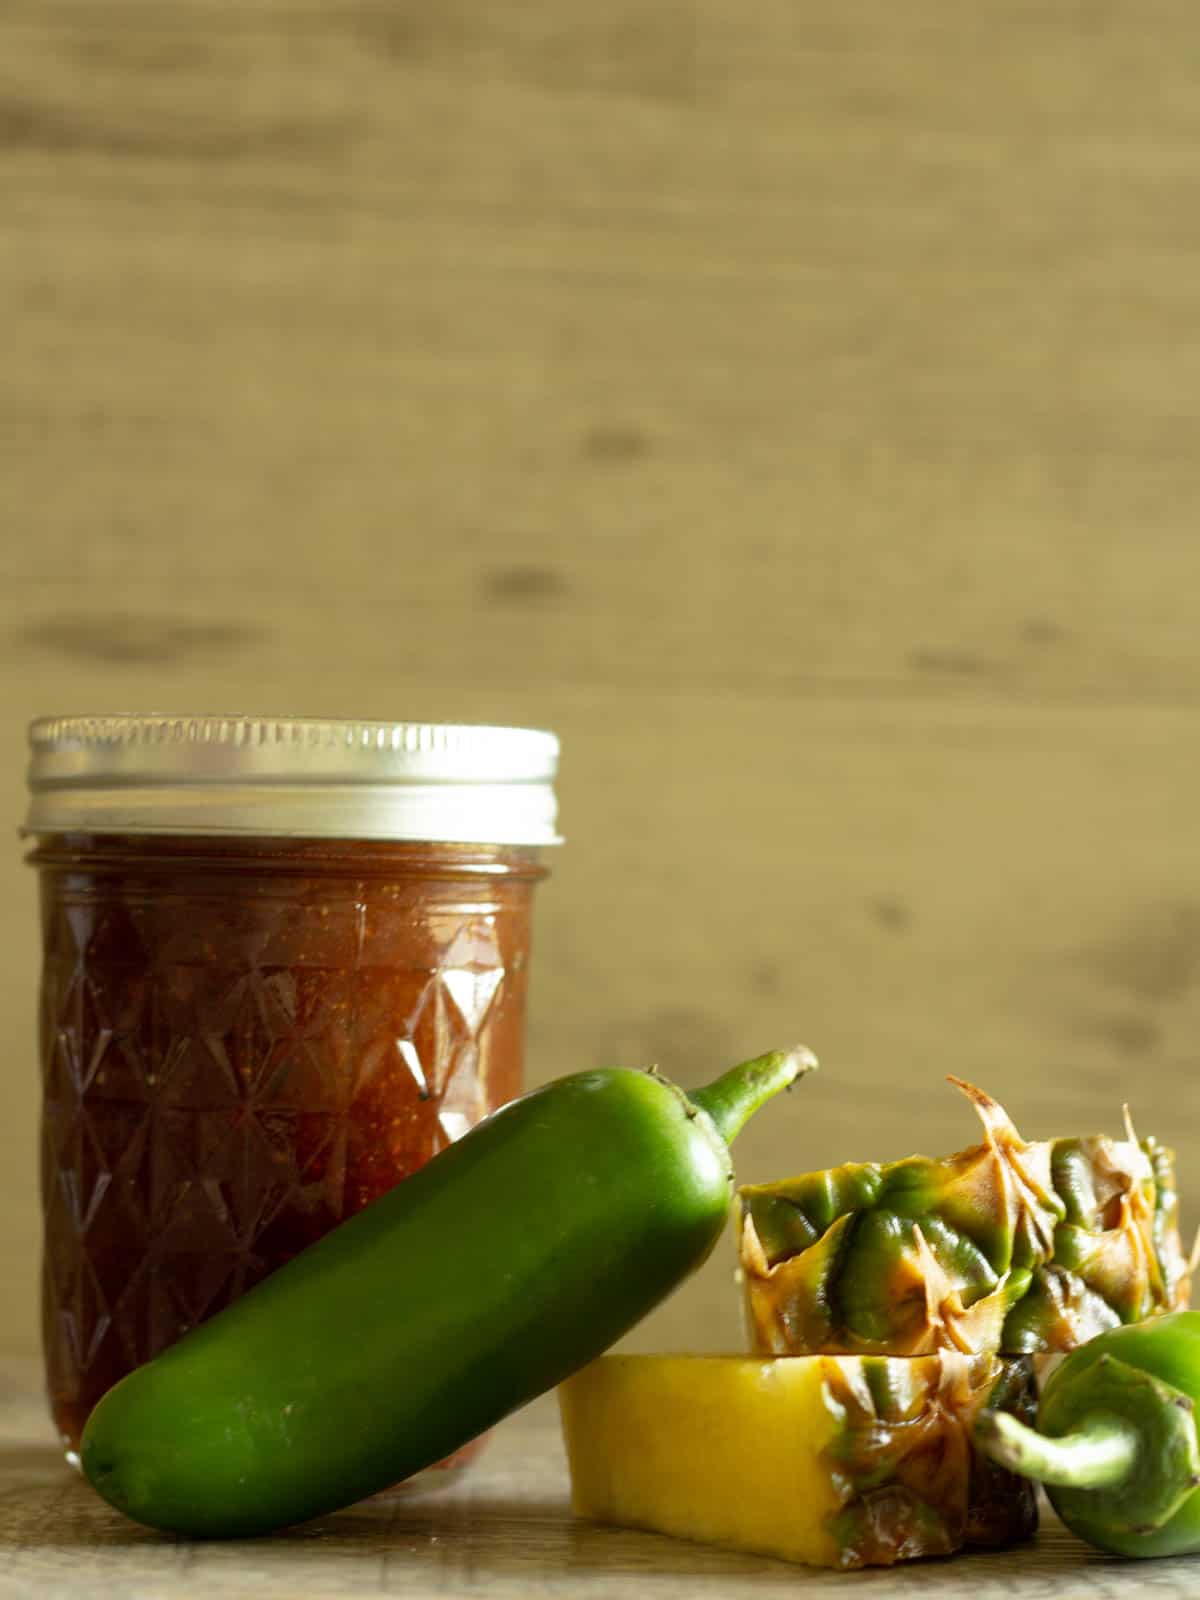 Jar of pineapple barbeque sauce next to jalapenos and fresh pineapple